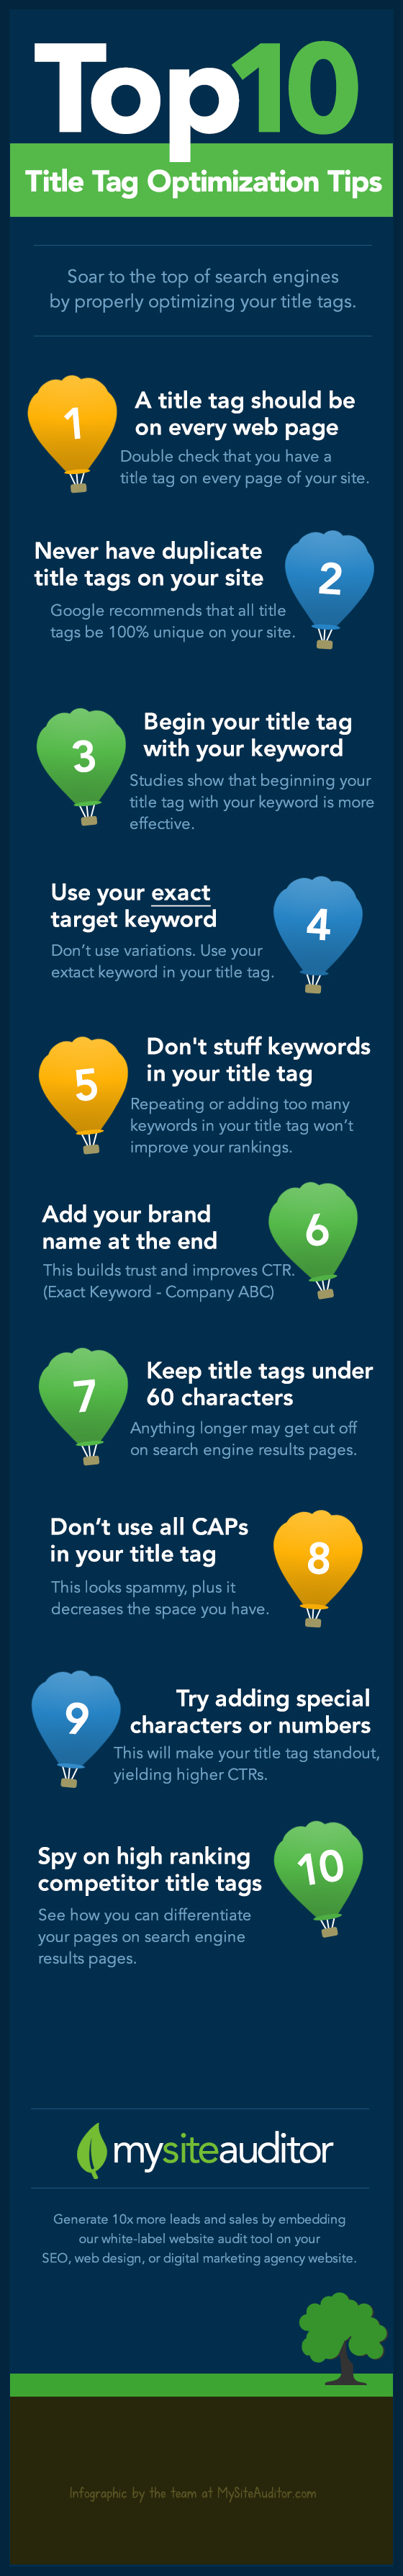 Top 10 Title Tag SEO Tips 